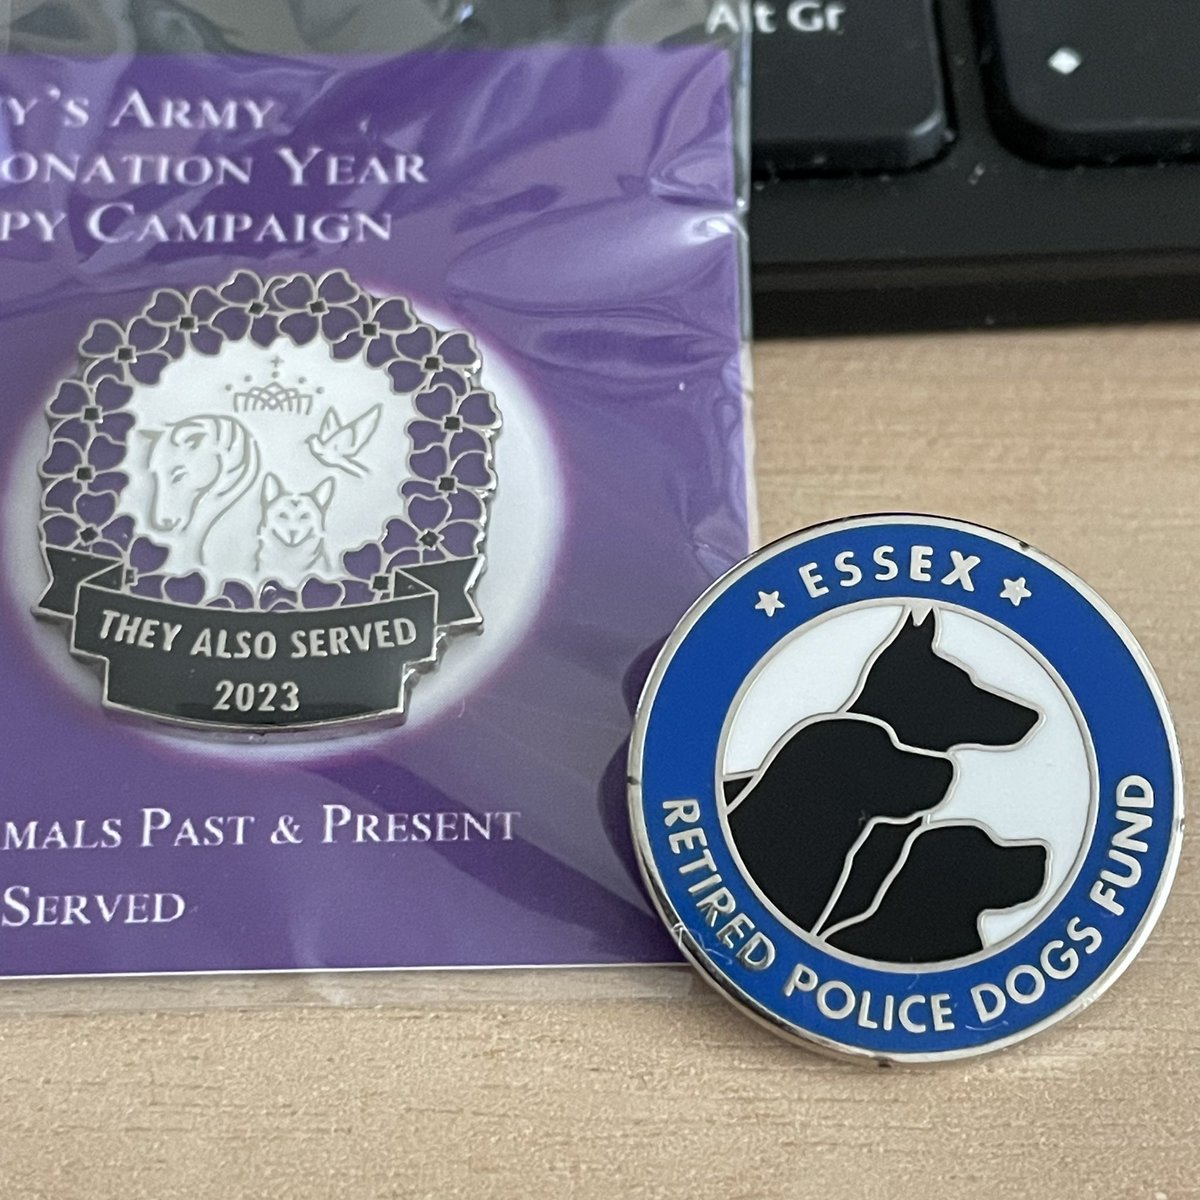 Proud to support these two charities working hard to provide support for the animals who have served. 

#policedog #K9 #policehorse #militaryhorse #militarydog #MurphysArmy #PurplePoppy #ERPDF #essexretiredpolicedogsfund #TheBeardyTog 

@MA_PurplePoppy @ERPDF